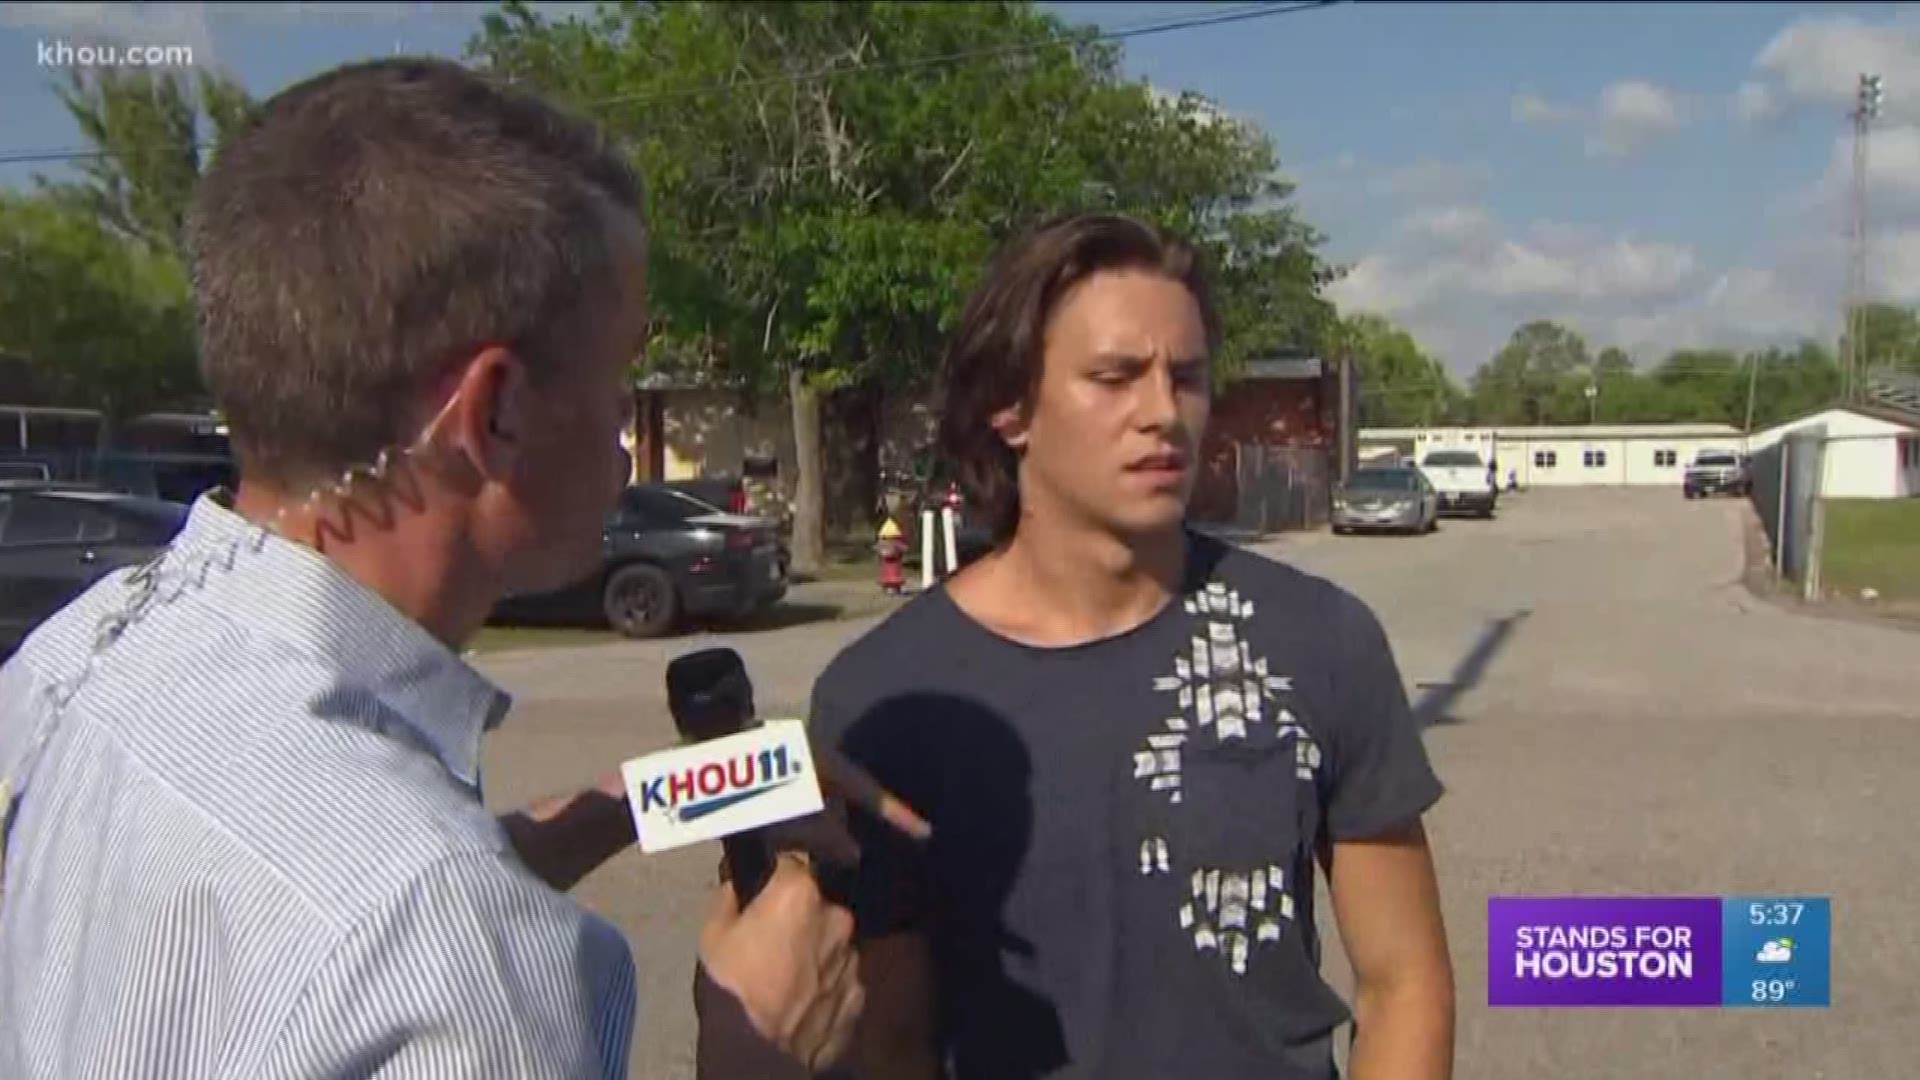 KHOU 11 reporter Jason Miles talks to Aidan Gomez, a Santa Fe High School junior who was on the football team with the suspected gunman of Friday's mass shooting.